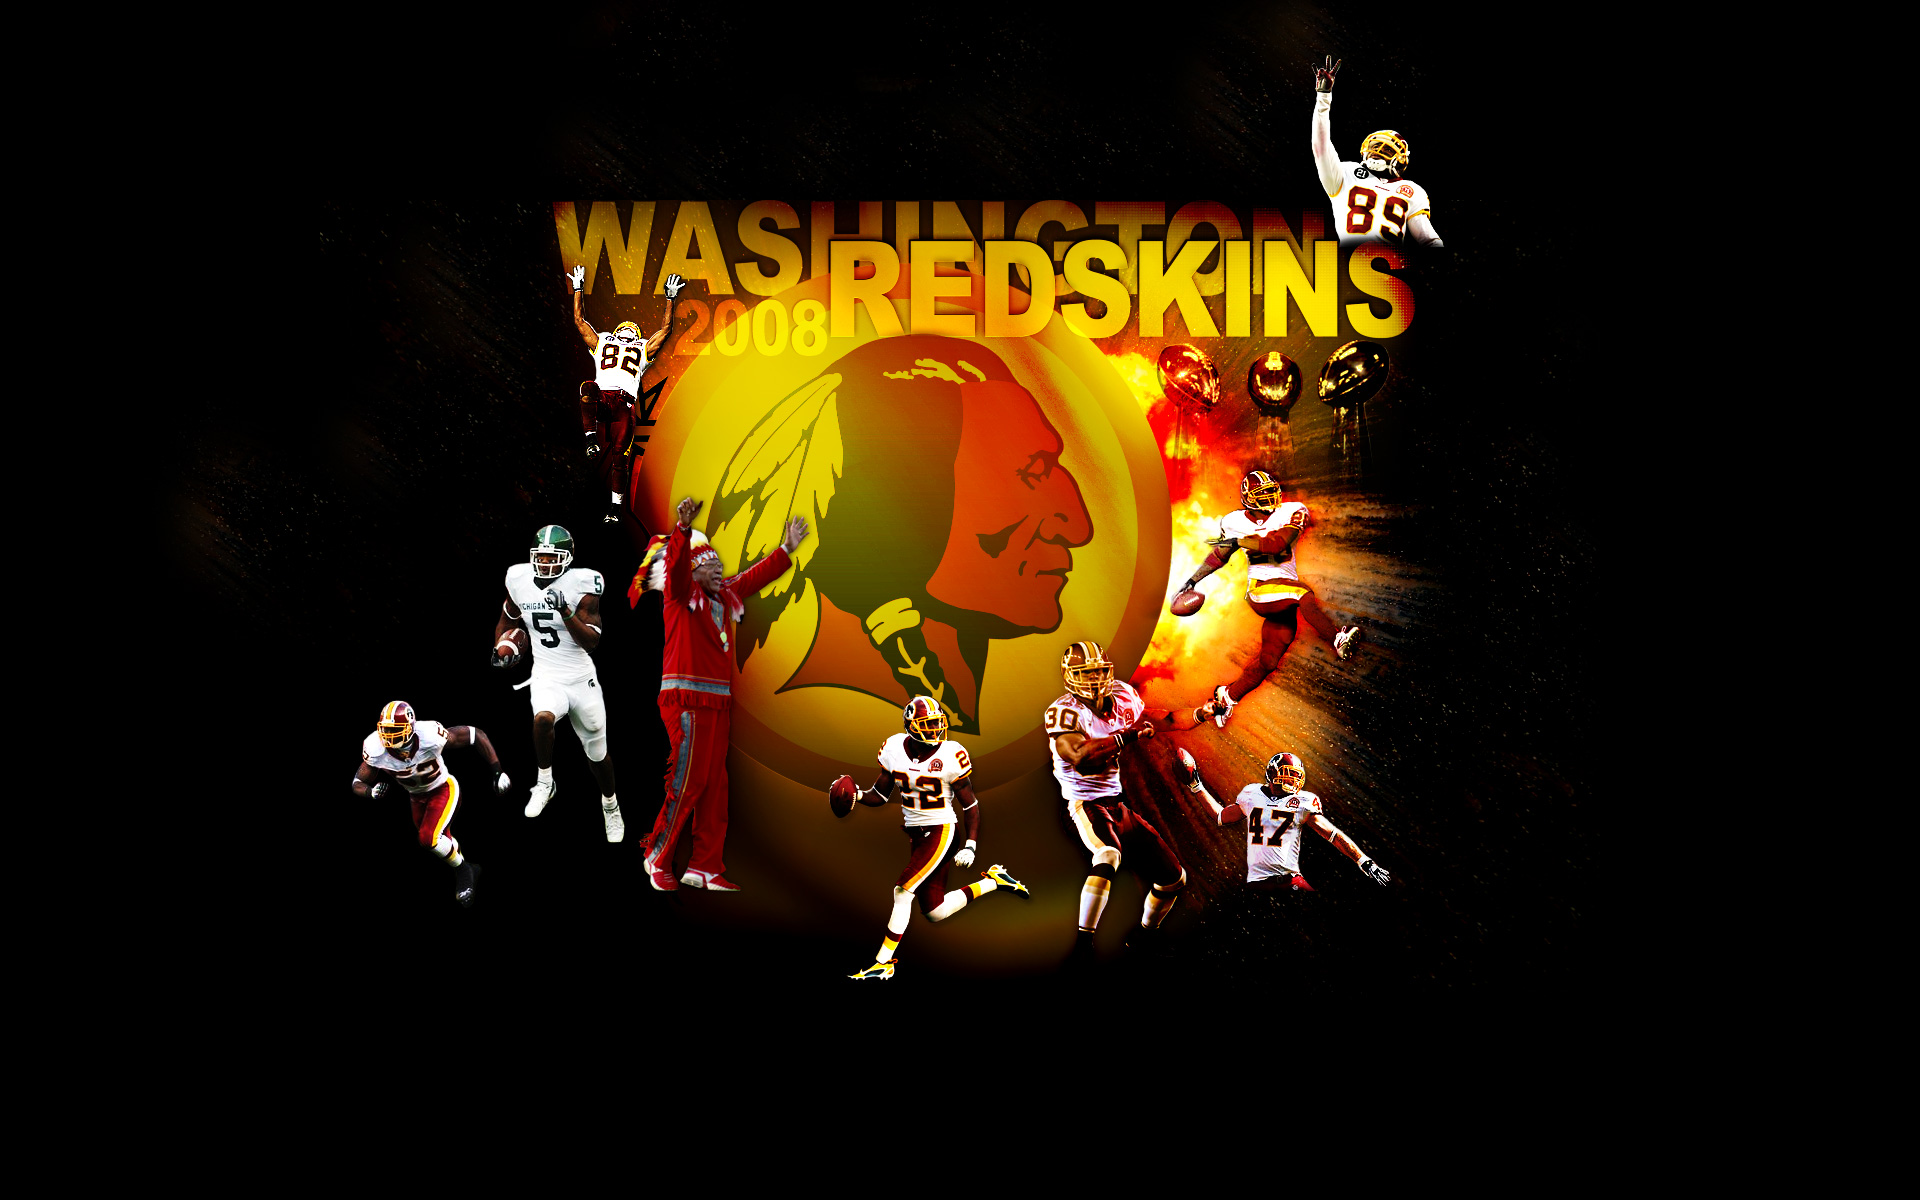 Remend You This Great Picture Enjoy Washington Redskins Wallpaper